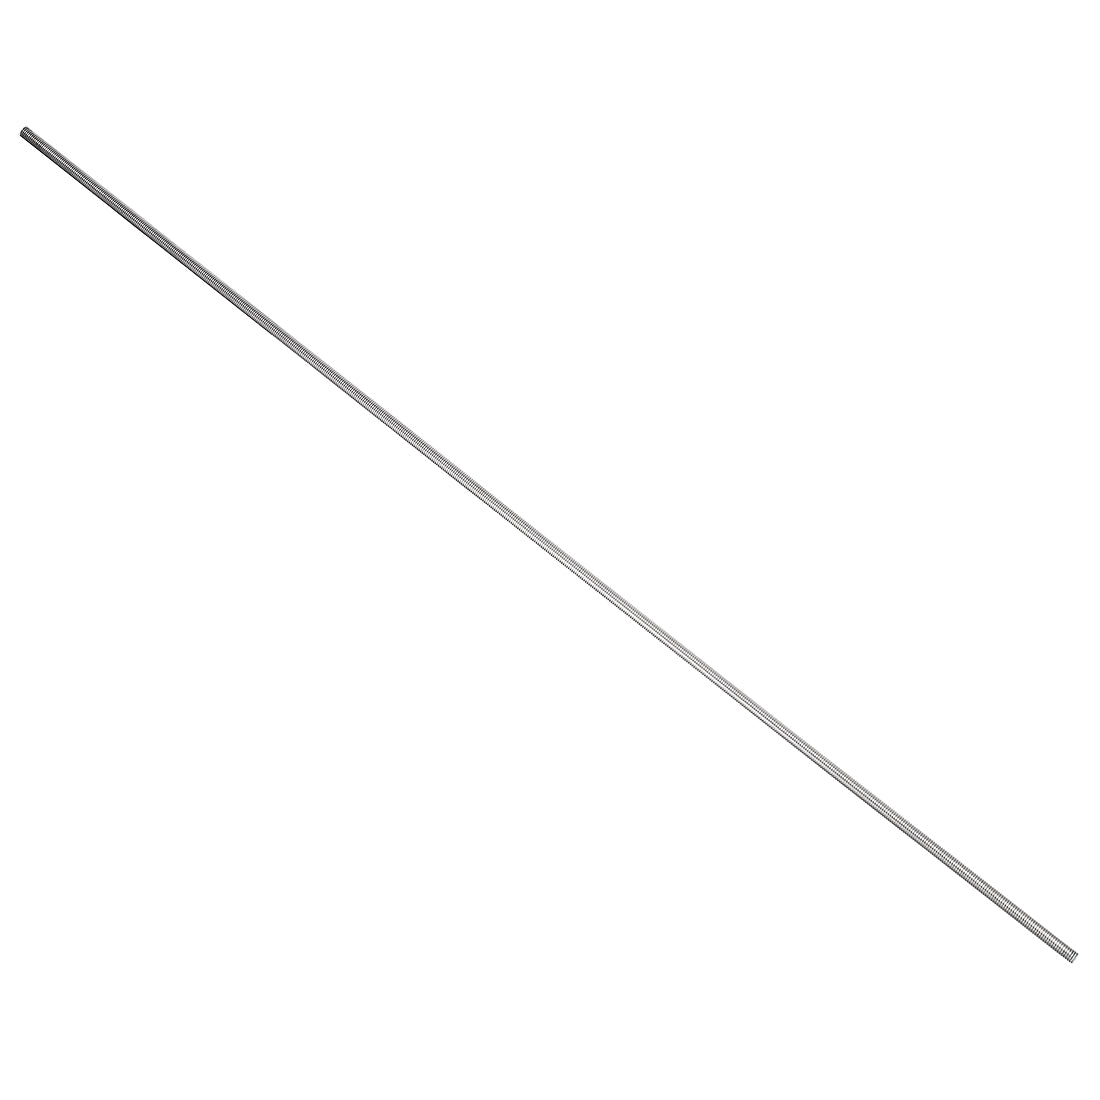 uxcell Uxcell M5 x 500mm Fully Threaded Rod 304 Stainless Steel Right Hand Threads